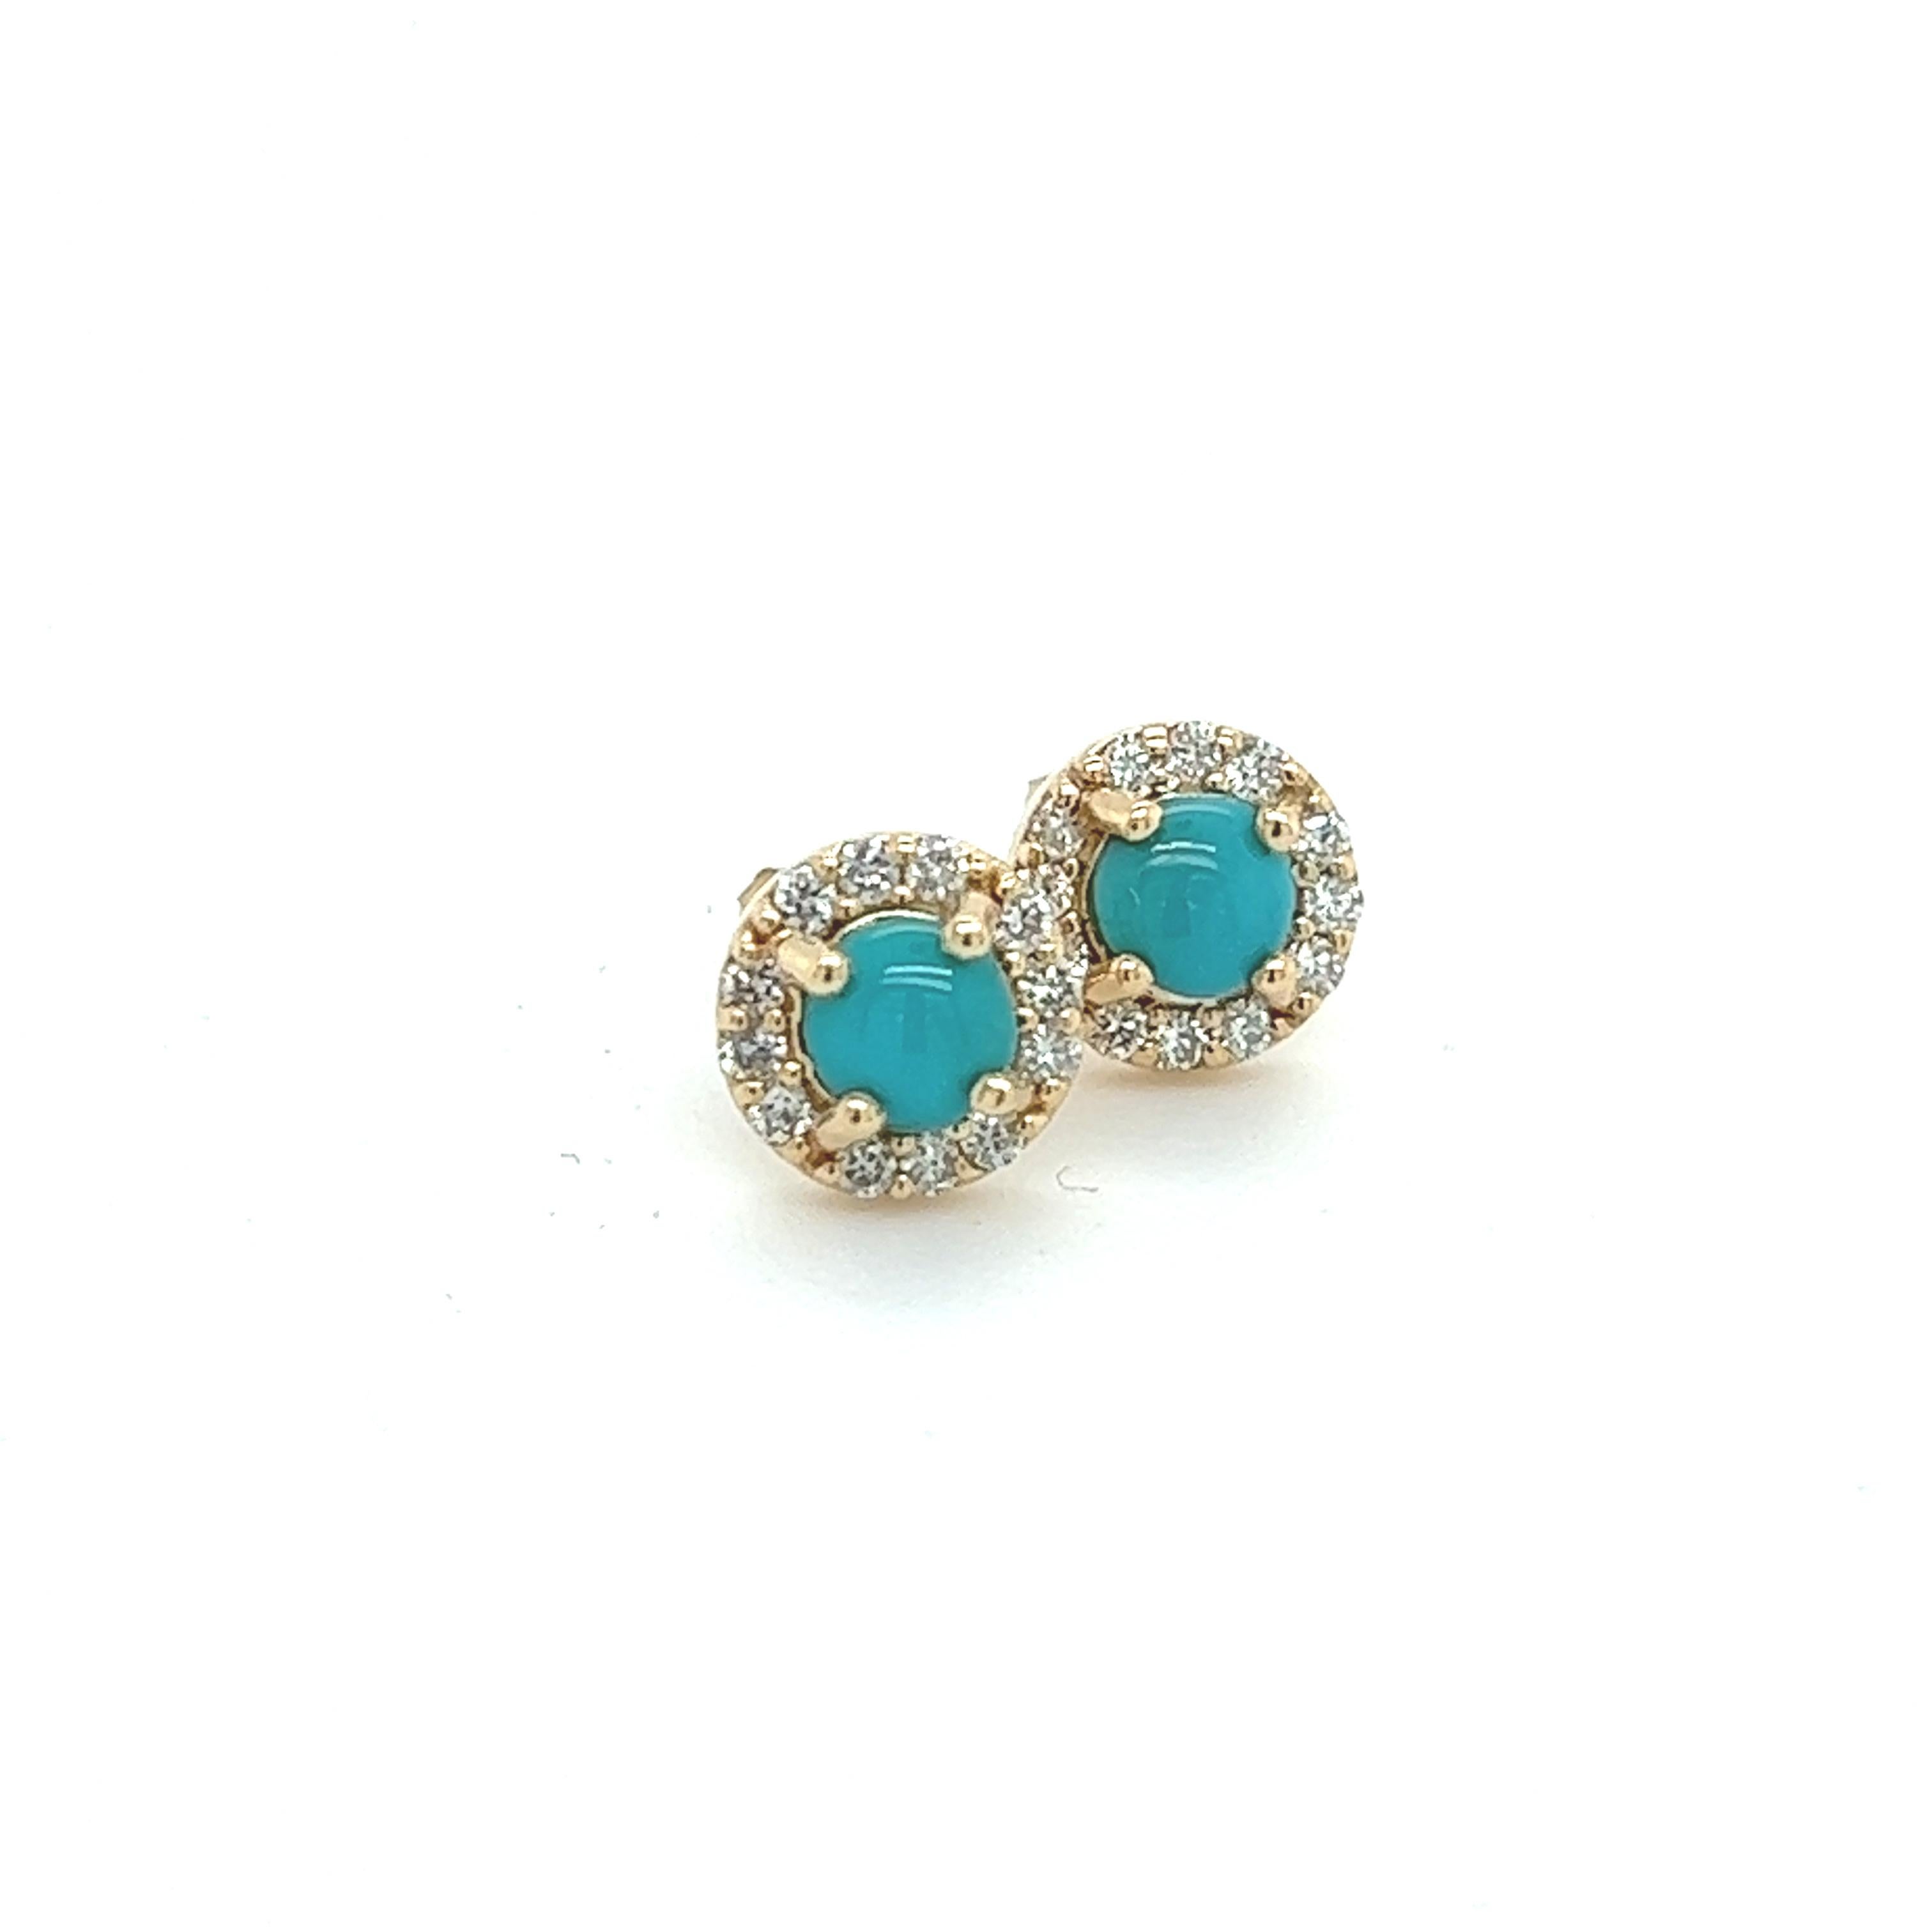 Natural Turquoise Diamond Stud Earrings 14k Yellow Gold 0.65 TCW Certified For Sale 4